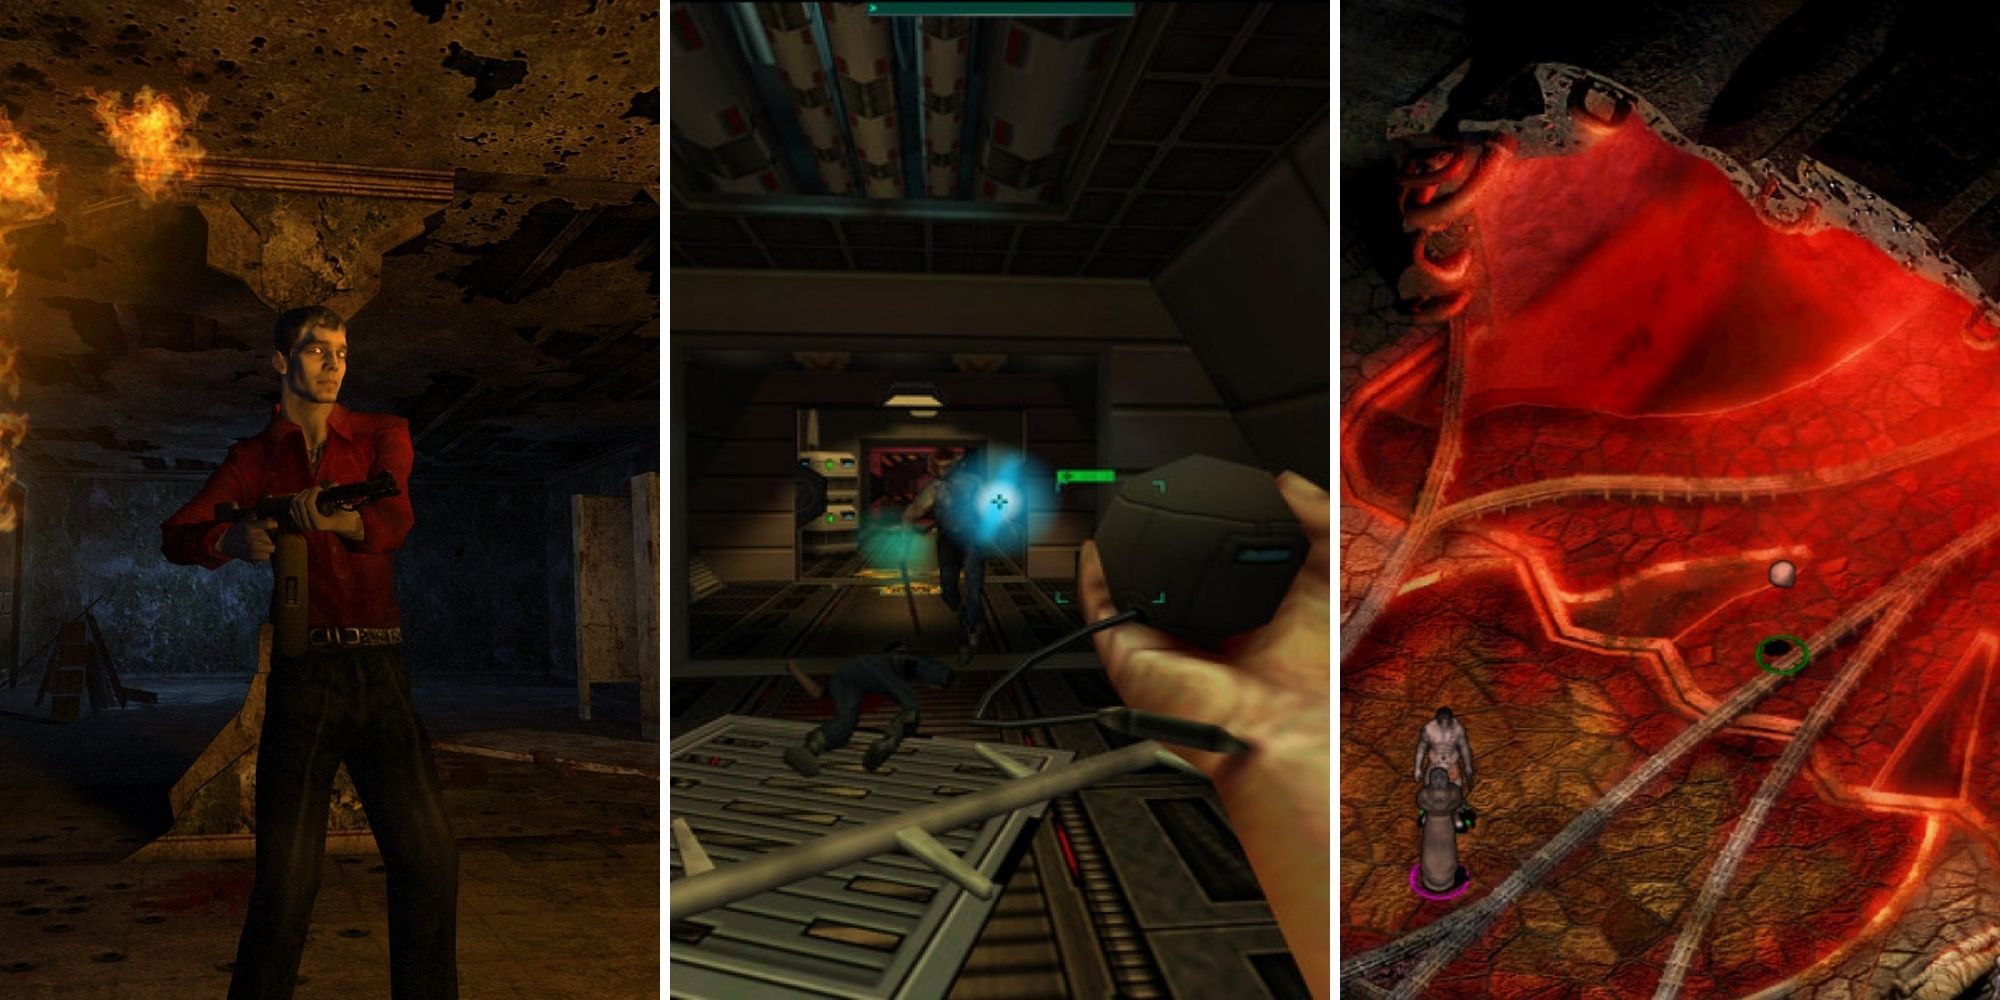 A grid showing the three darkest Western RPGs Vampire: The Masquerade - Bloodlines, System Shock 2, and Planetscape: Torment